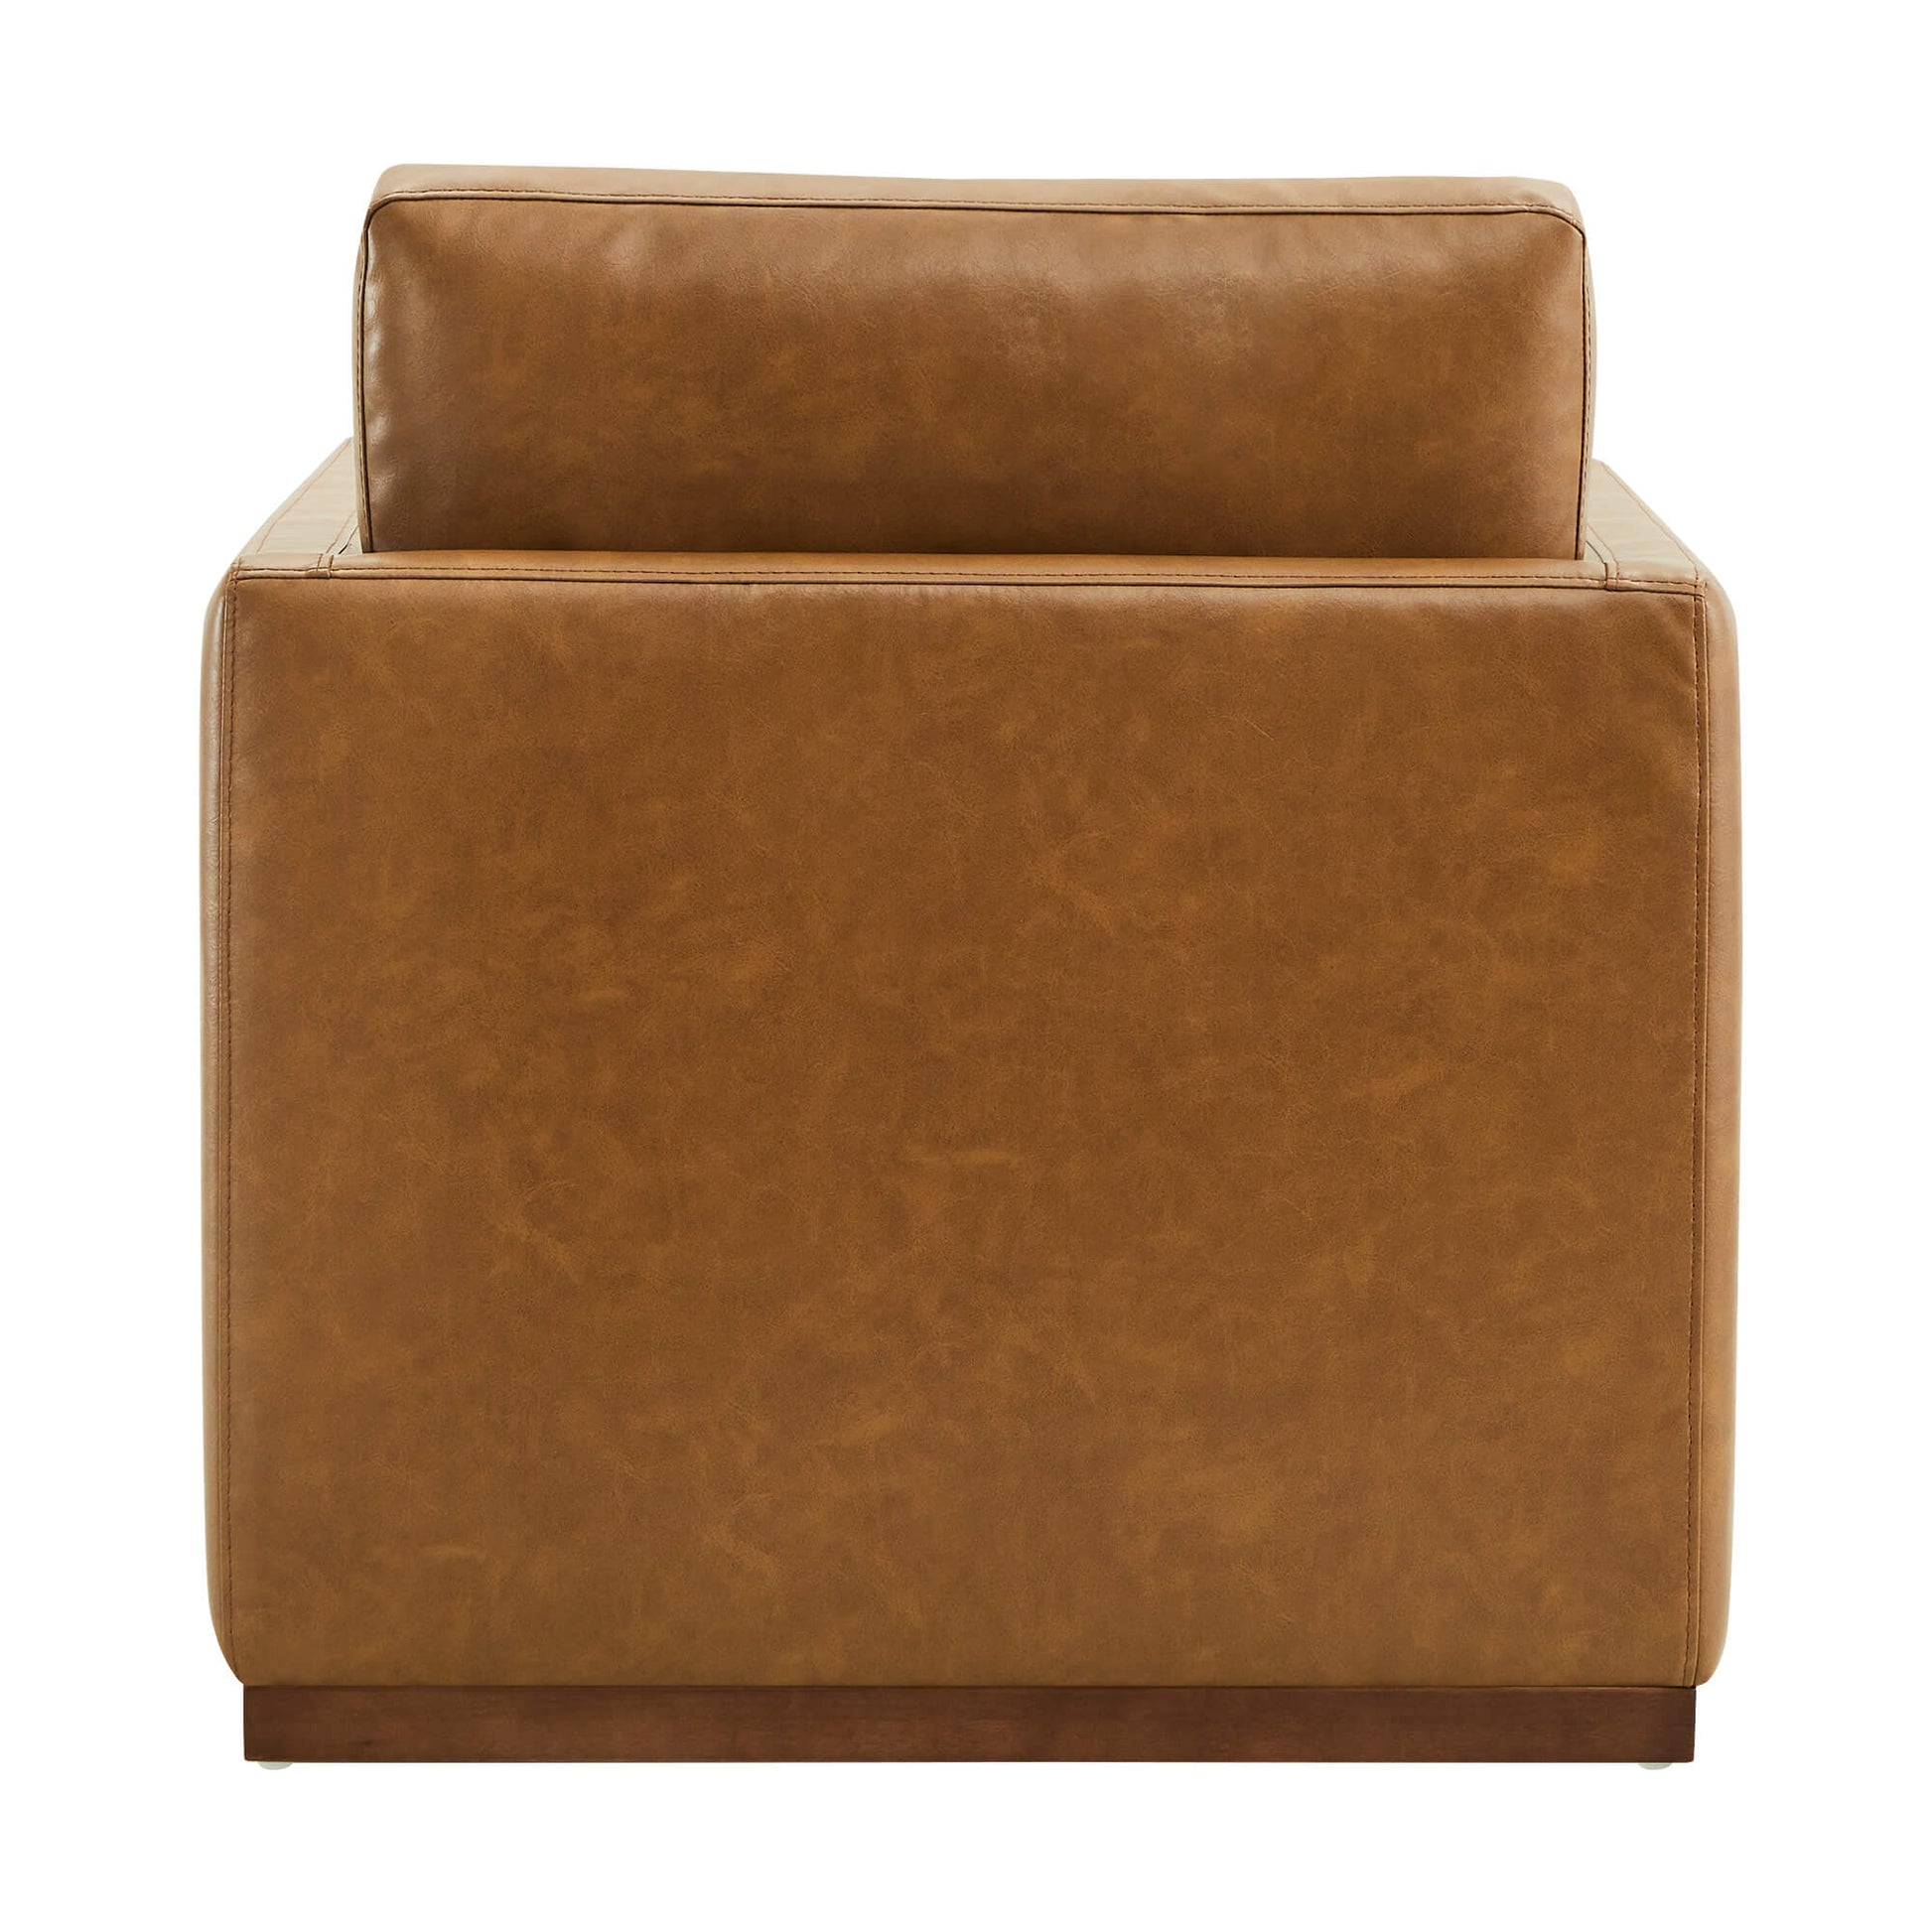 CHITA LIVING-Henry Swivel Accent Chair with Wood Base-Accent Chair-Faux Leather-Saddle Brown-